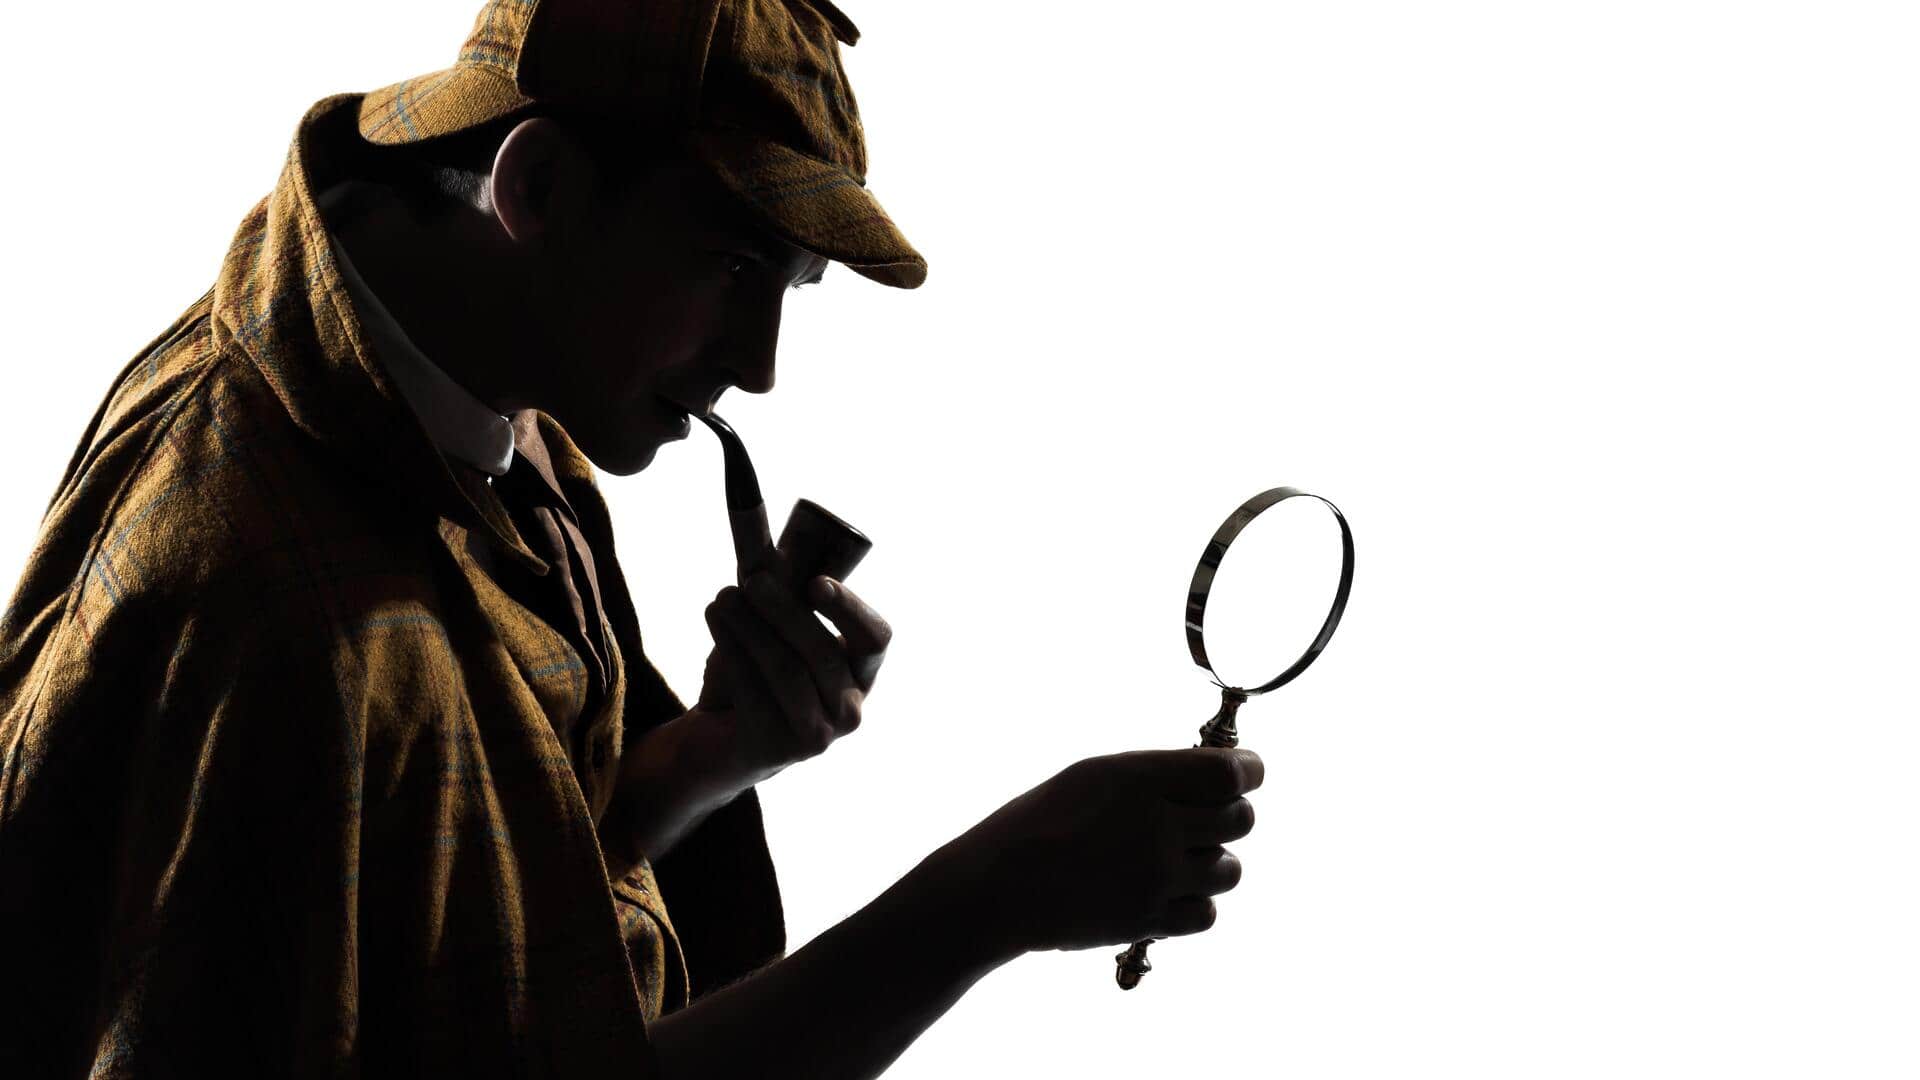 Read these detective fiction books similar to 'Sherlock Holmes'